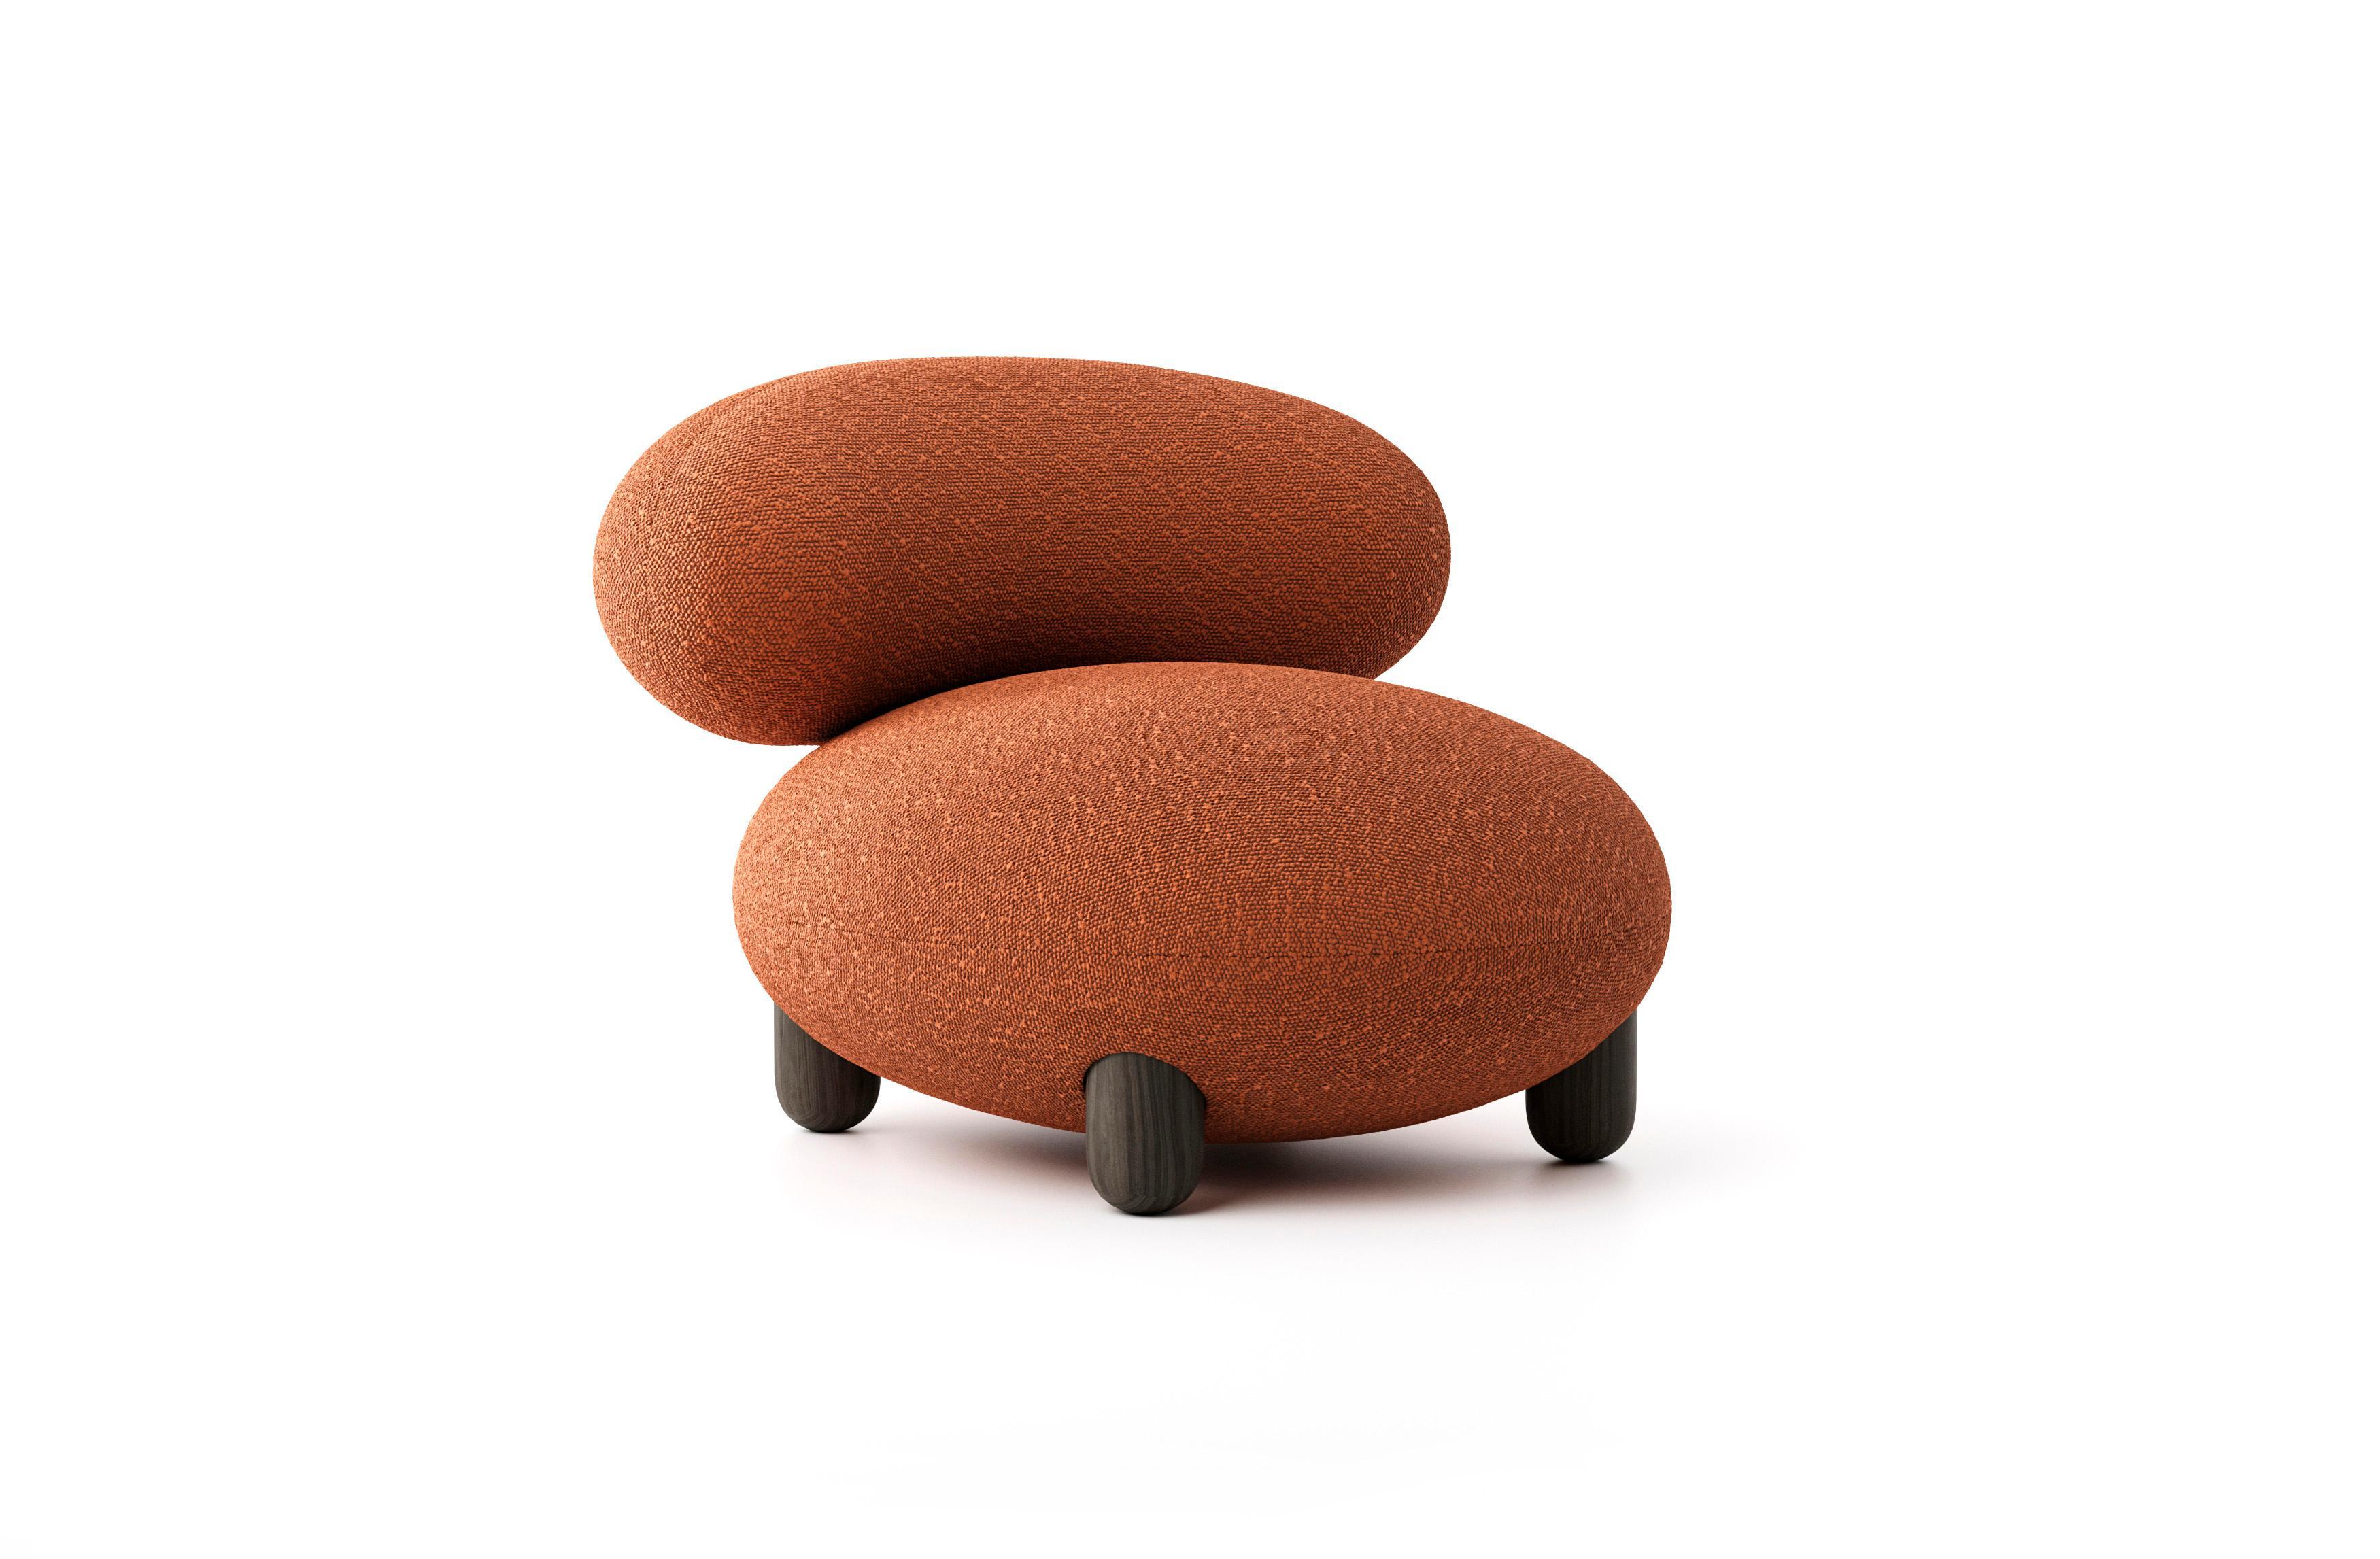 Flock Lounge Chair by Noom
Designer: Kateryna Sokolova

Fabric in picture: Baloo 2078
Dimensions: H 72 cm, W 90 cm, D 99 cm seat H 44 cm
Materials: wood, plywood, foam rubber, injection-molded soft foam, textile

Available in a wide range of Dedar